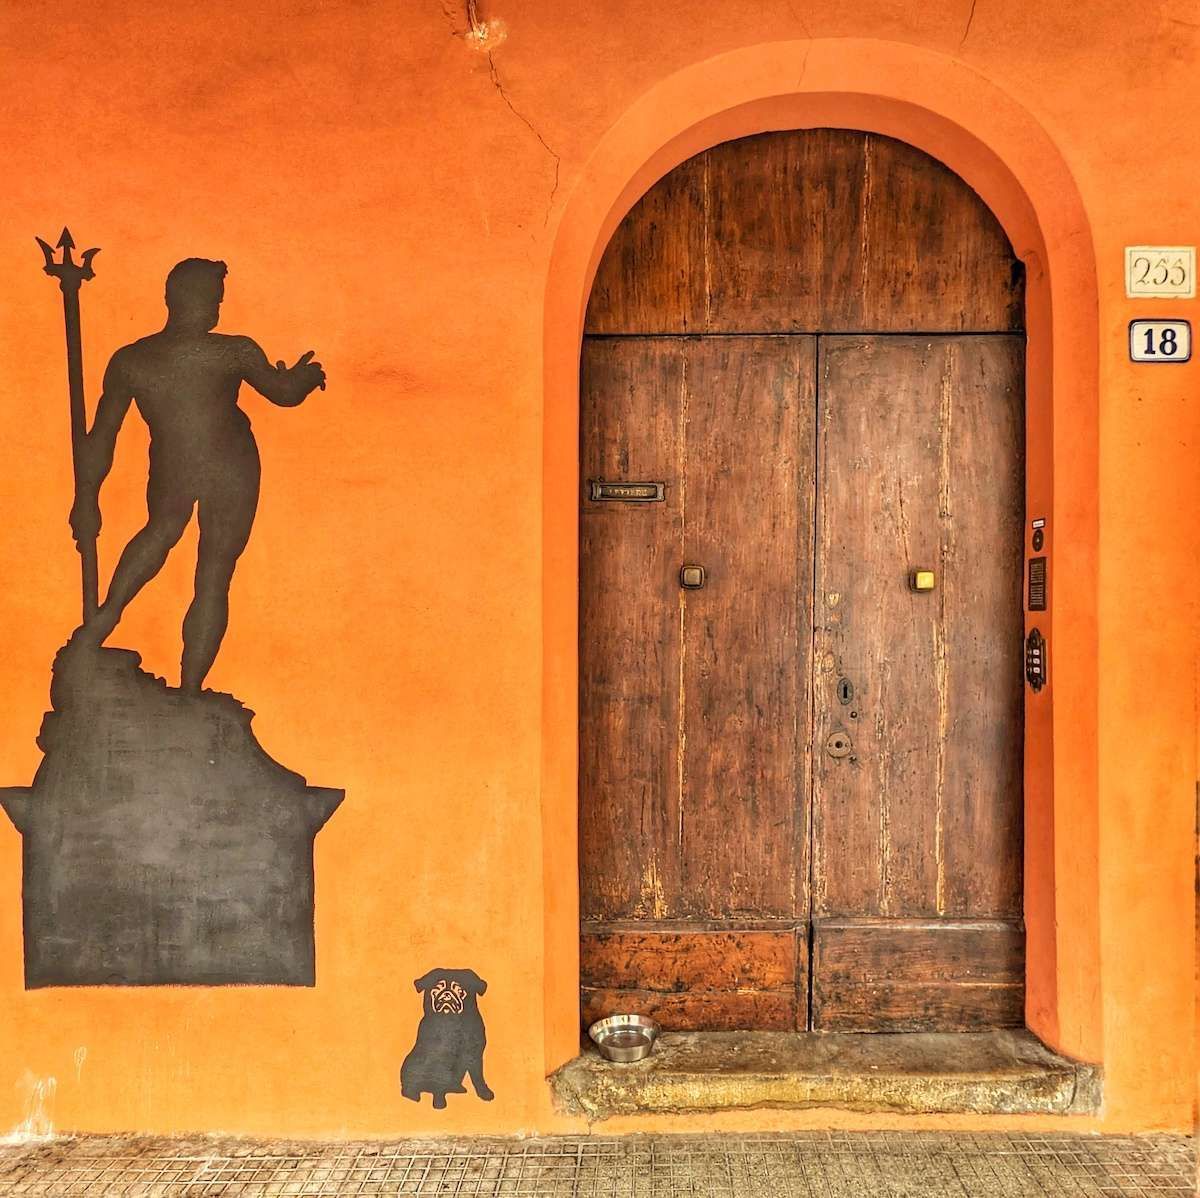 Last week I shared a teaser of my #doorofthemonth. It's time for the big reveal... I found this #door in #Bologna #Italy. That pug! 😍 Reply with your pick for door of the month! 🚪 For more glorious #doors, visit buff.ly/4cRZ4Y0 #DailyDoor #AdoorableThursday